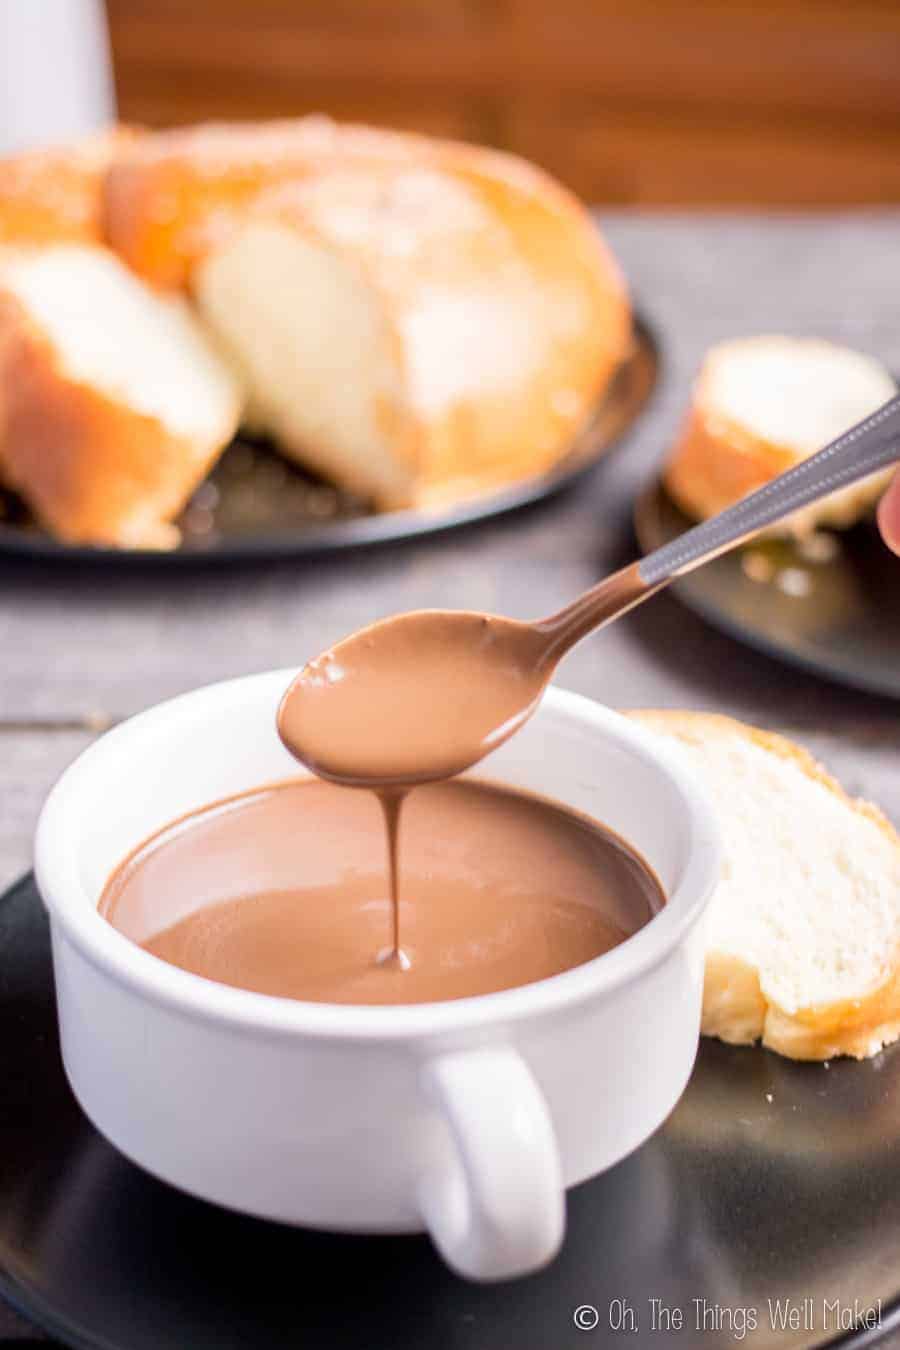 Spooning up a thick, Spanish hot chocolate known as chocolate a la taza. In this case, it's being served with pan quemado, a Spanish sweet bread typical at Easter.